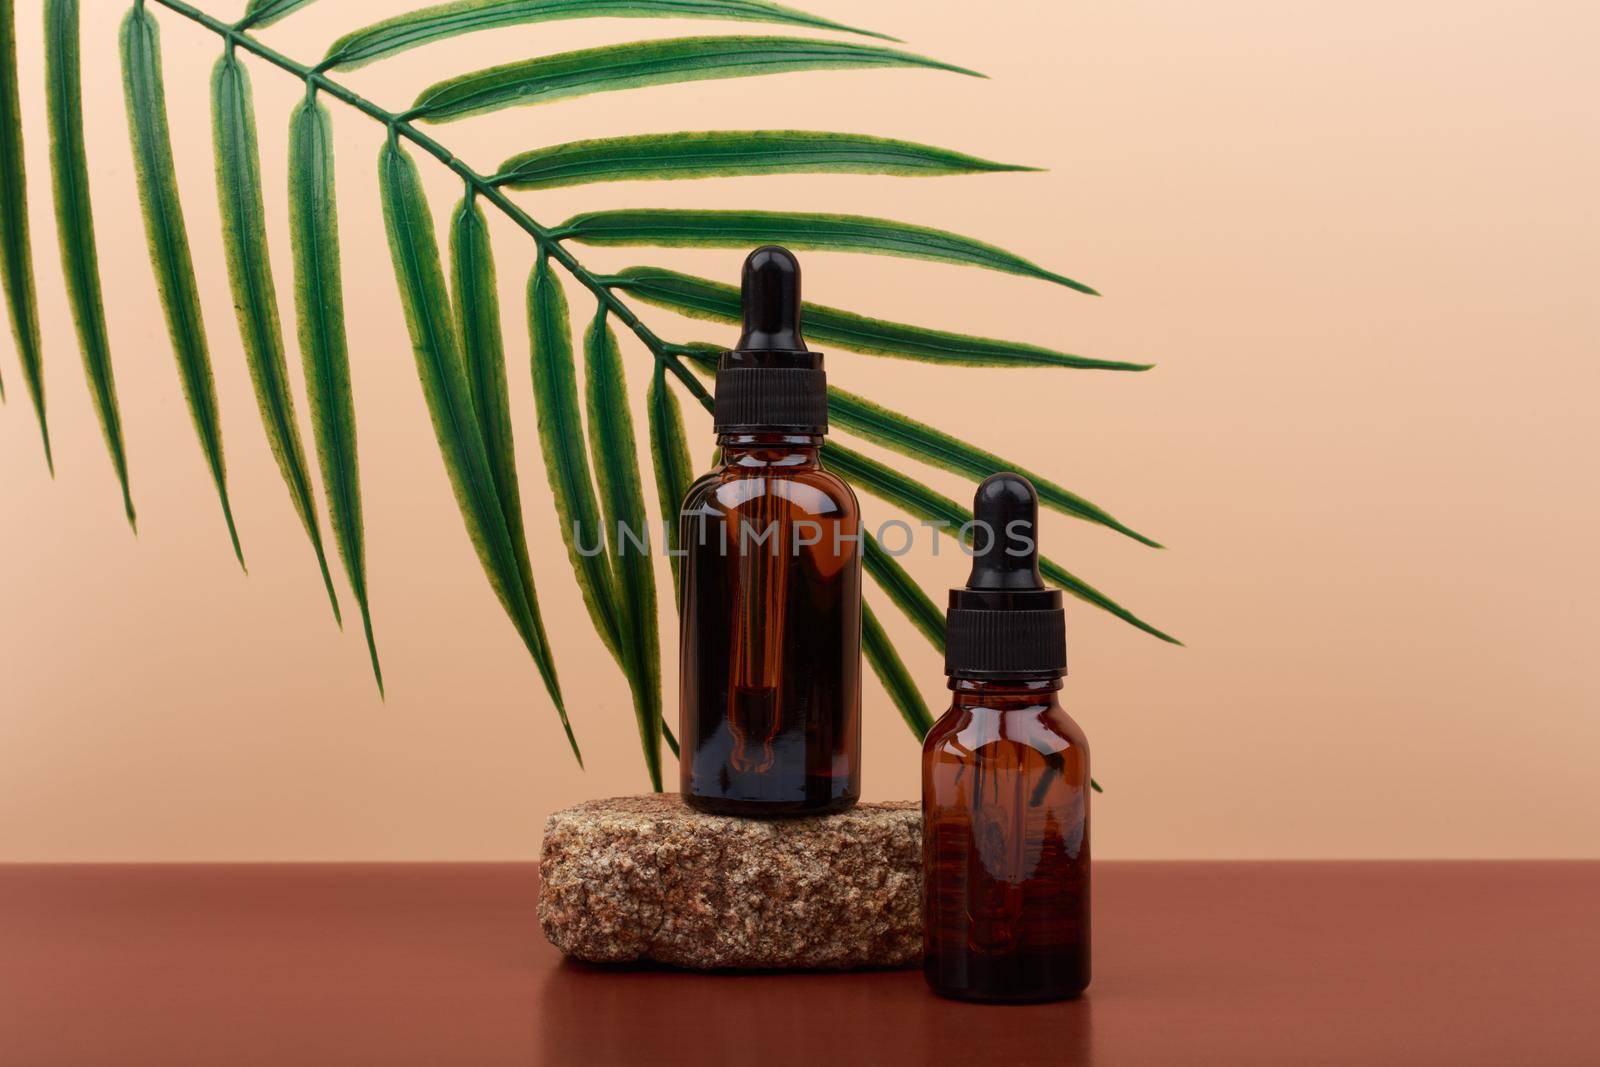 Two skin serums in dark glass bottles on stone against beige background with palm leaf. Concept of anti aging skin care products for woman